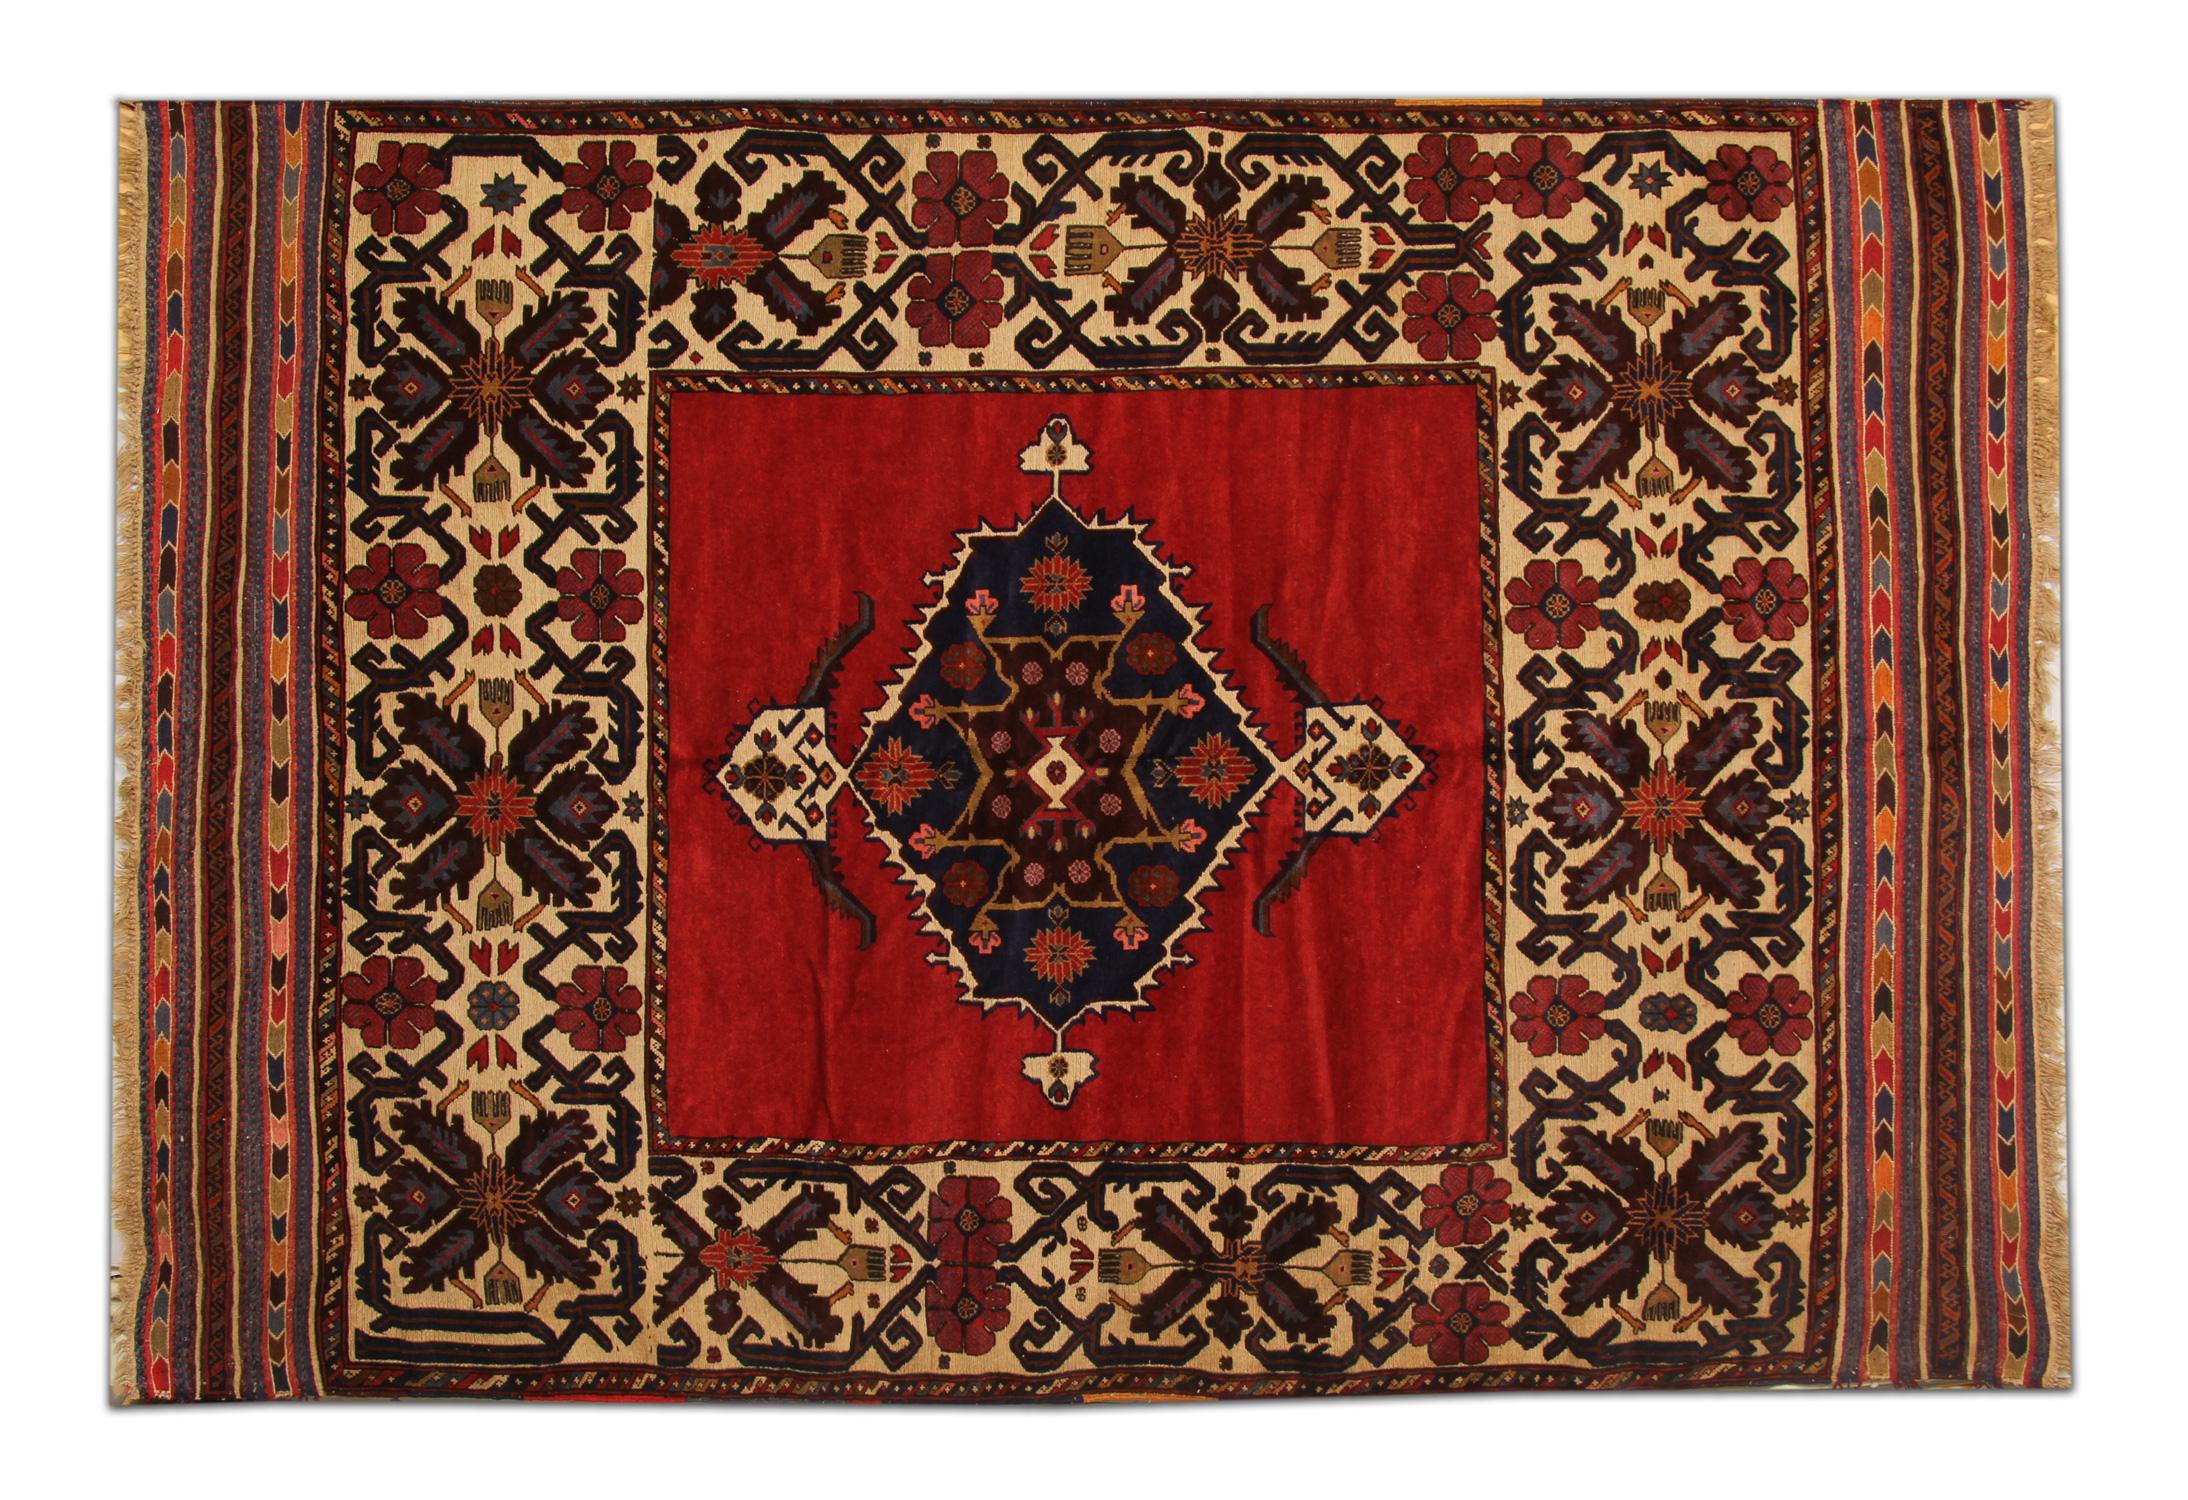 Featuring a highly detailed central medallion woven onto a red background. This is enclosed by a decorative repeat pattern floral motif border. Hand knotted with handspun, vegetable dyed wool and cotton this Vintage Afghan Area Rug is high quality